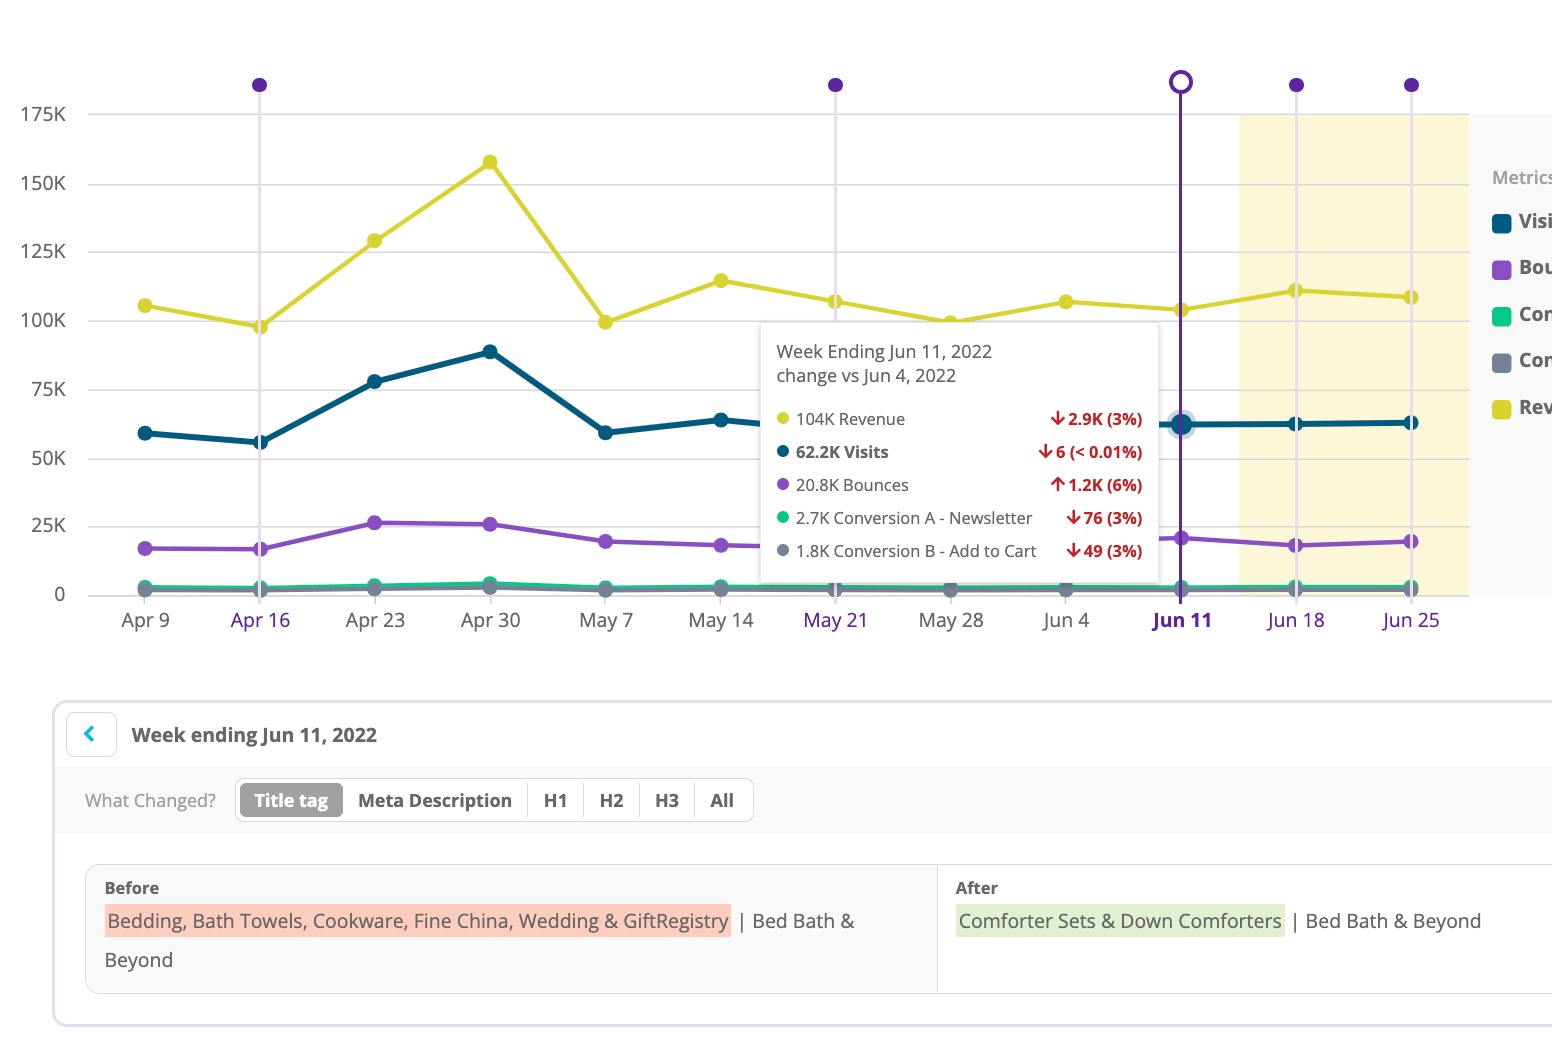 SEO Platform Report on the Shift in Page's Organic Metrics after Optimizations